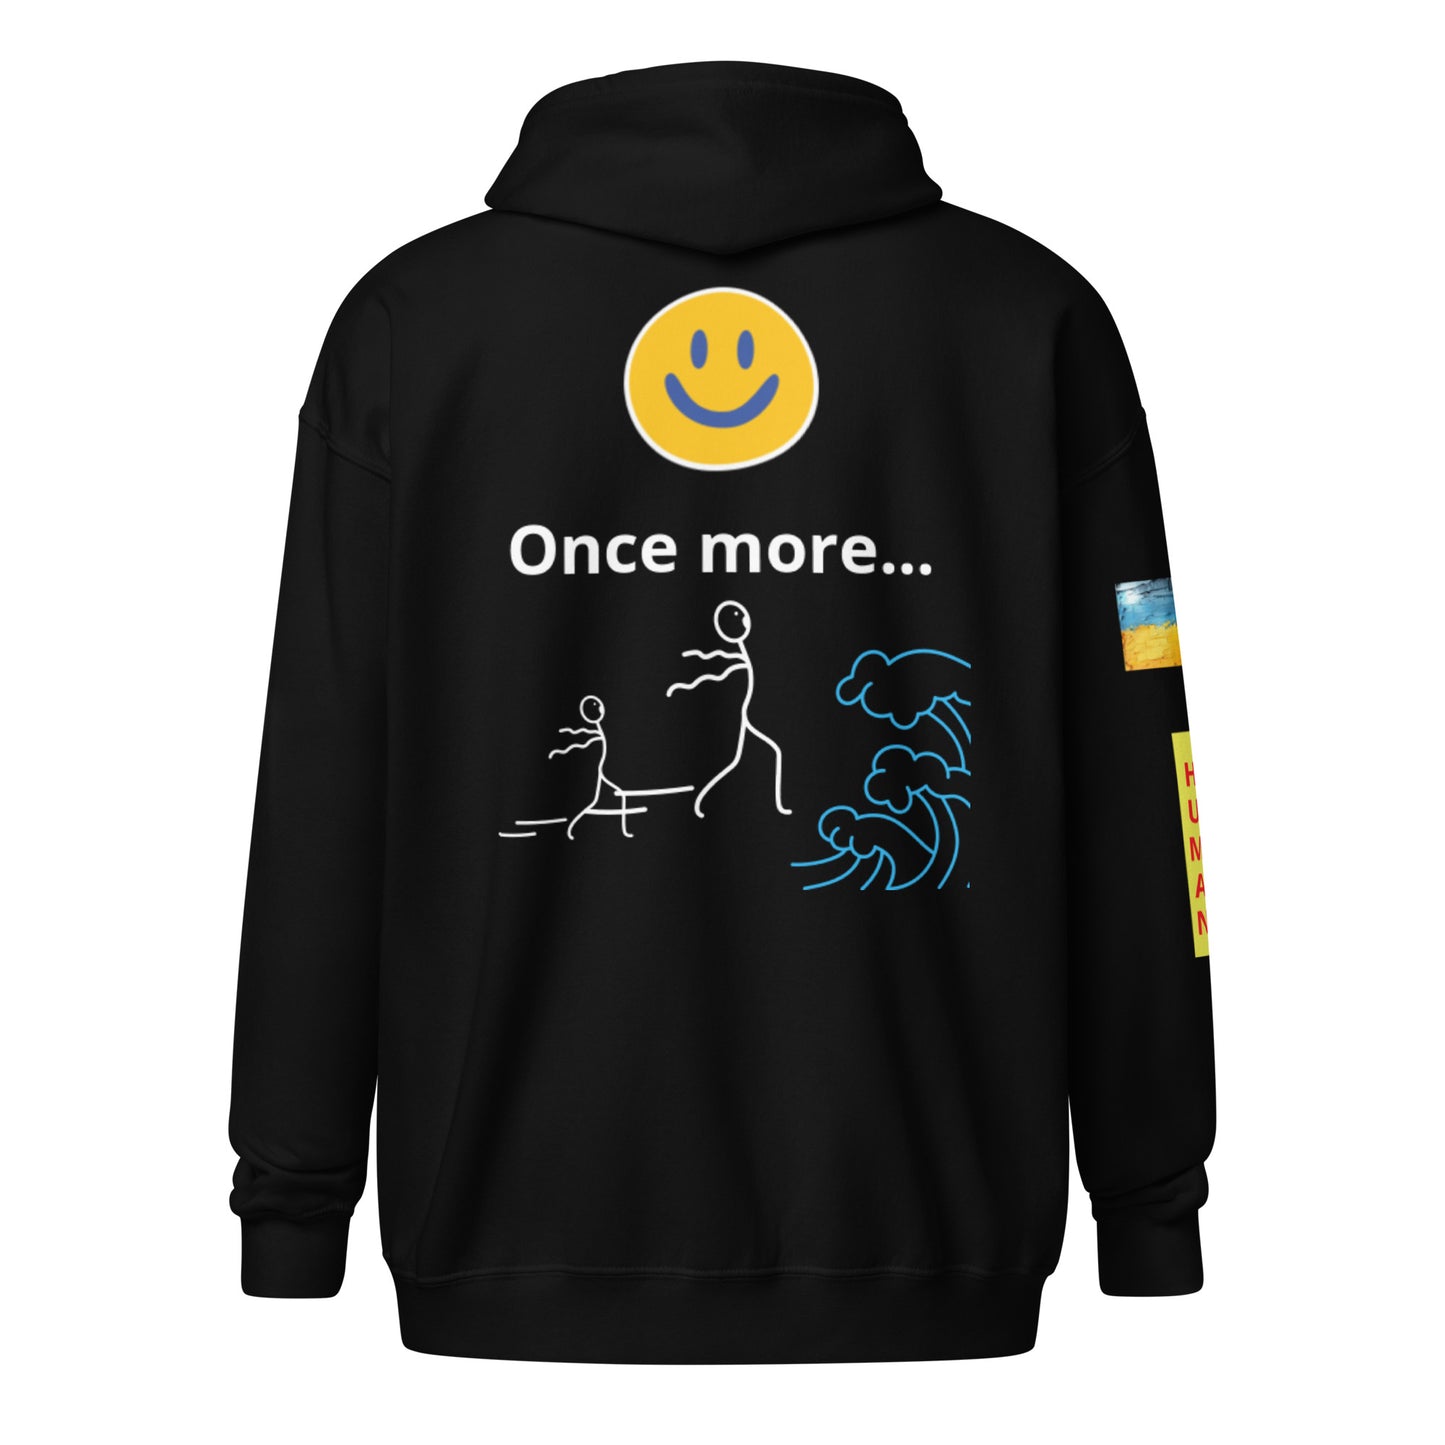 Ukrainian Flag Zip Hoodie: aturing the poignant quote 'Once More' by The Human Collection